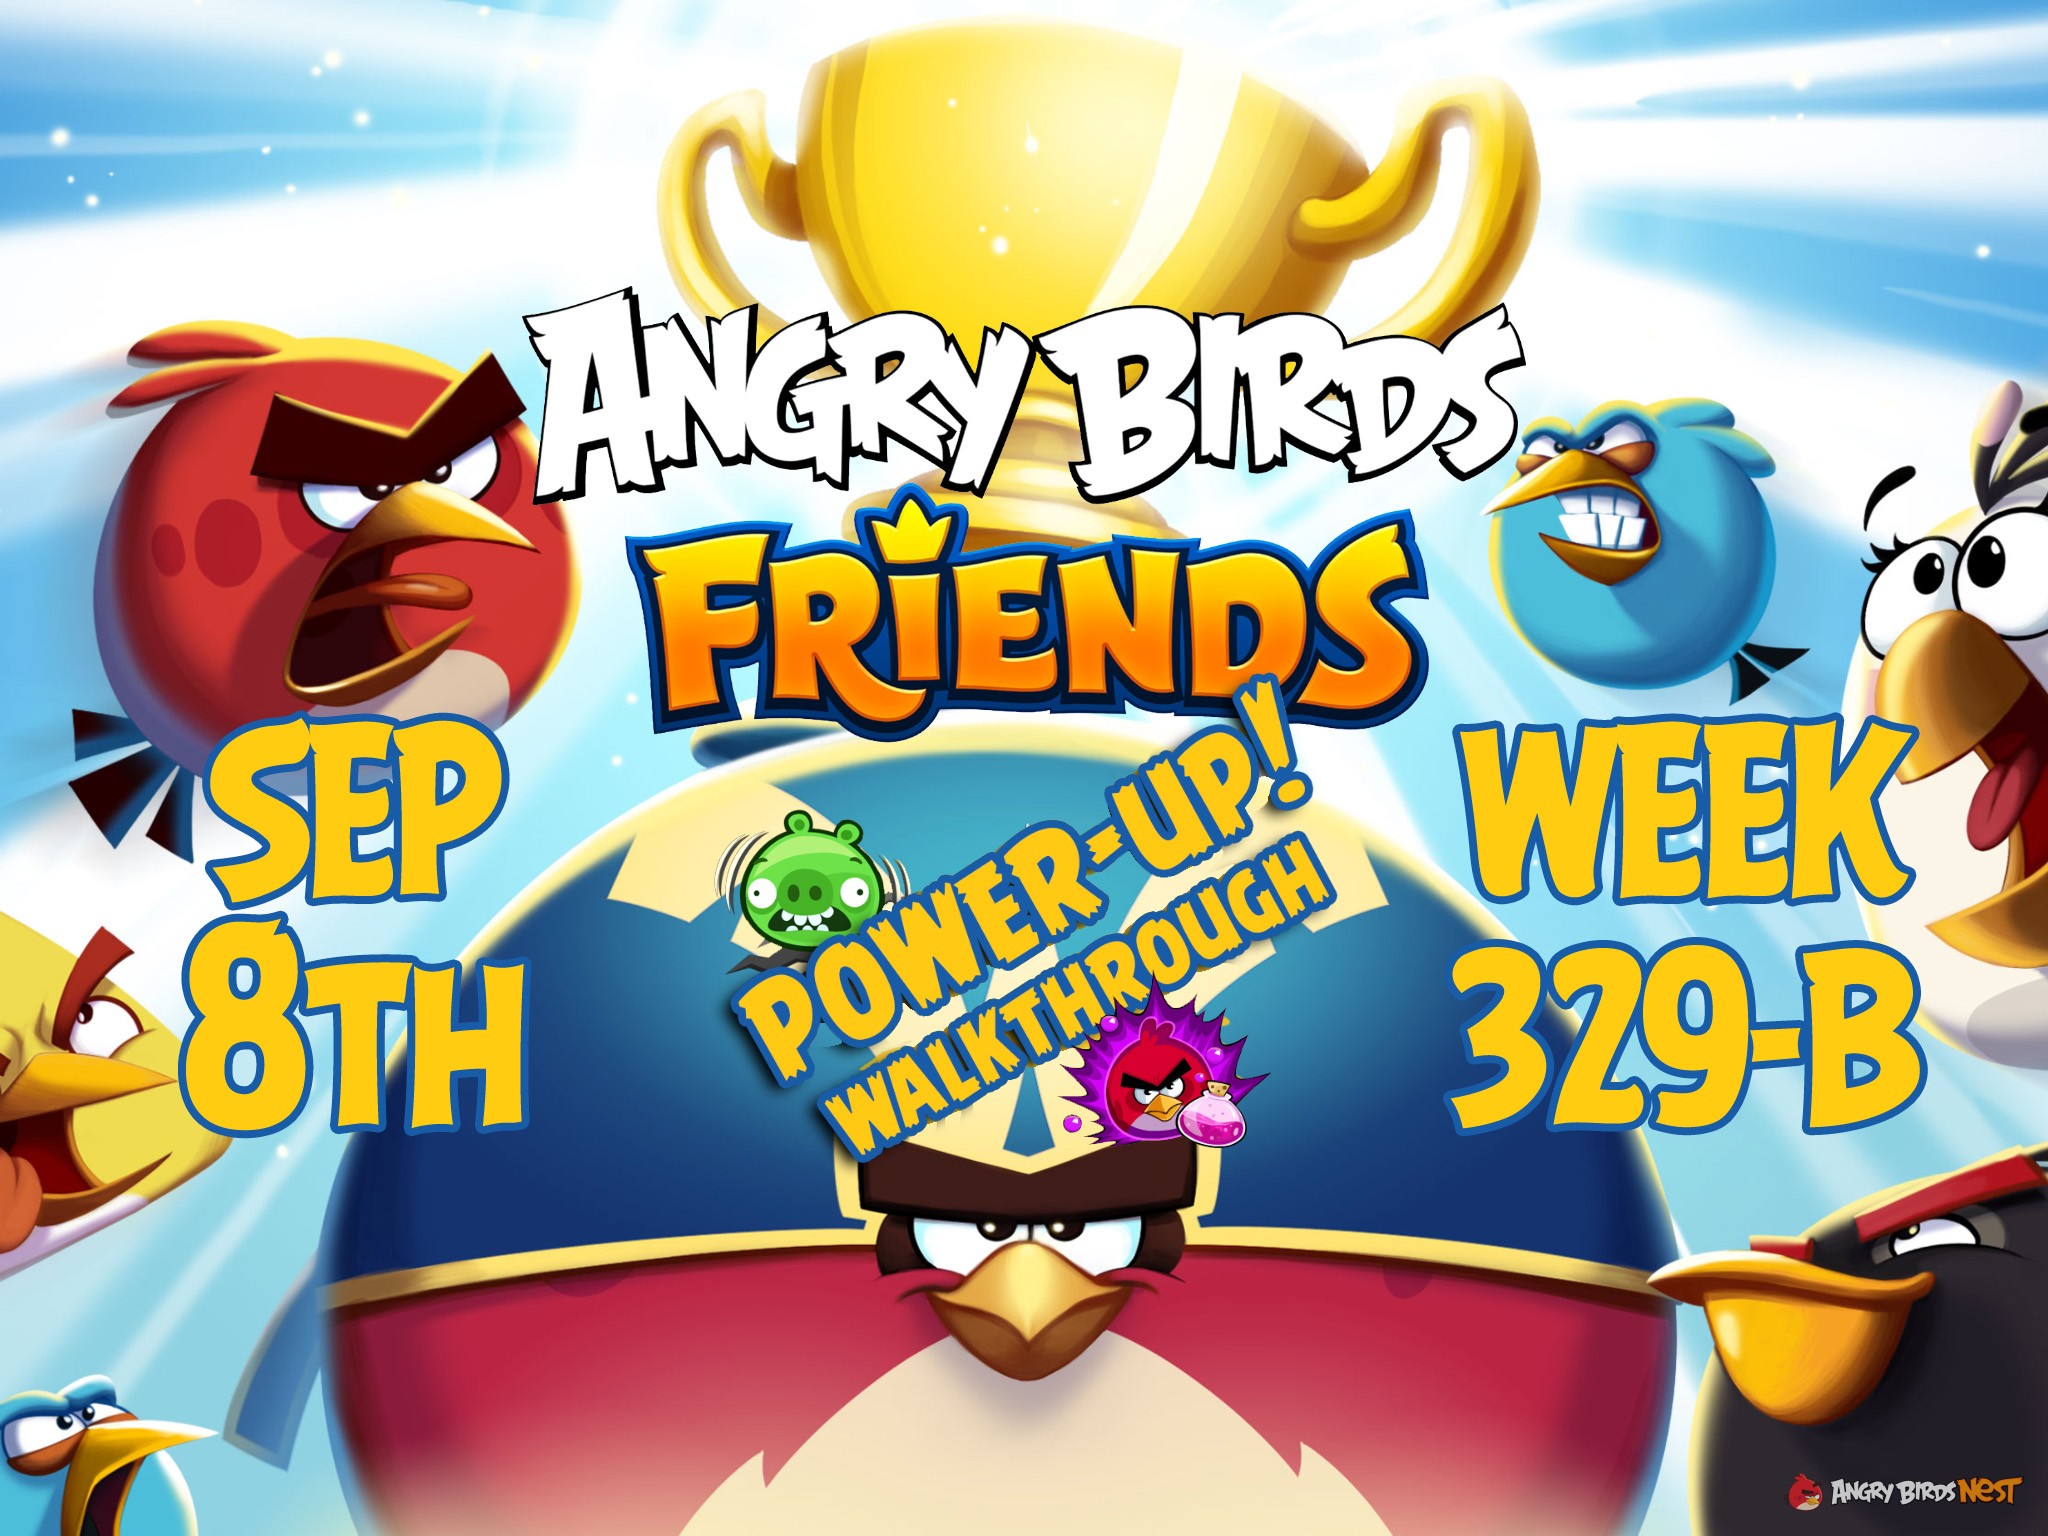 Angry-Birds-Friends-Tournament-Week-329-B-Feature-Image-PU